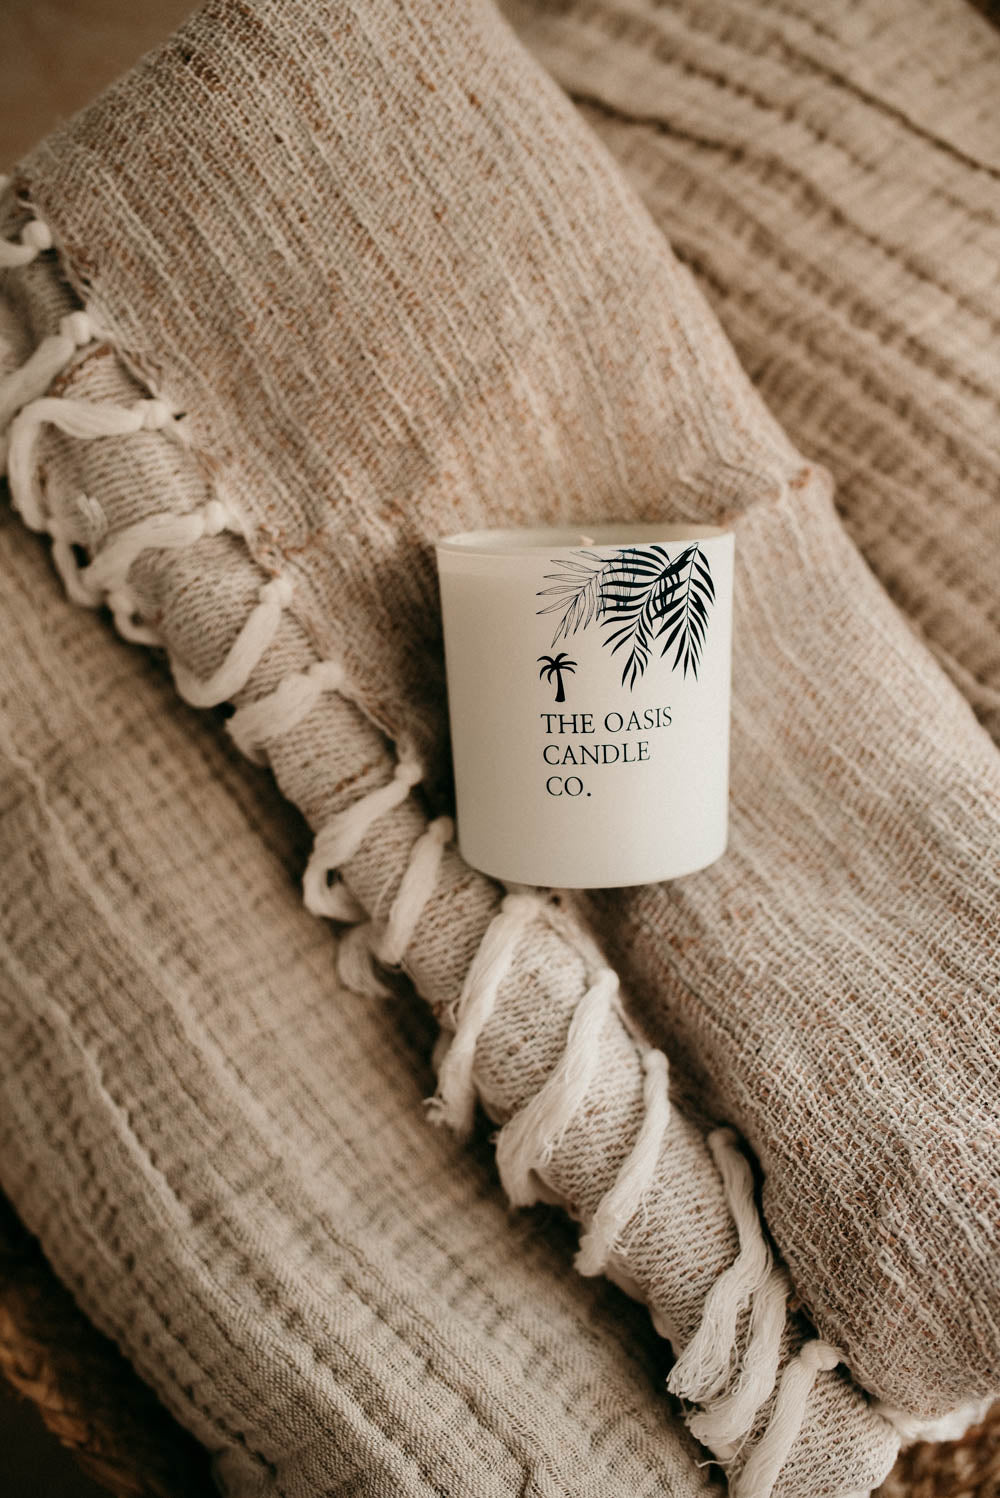 Dark Honey and Tobacco candles dubai from home fragrance brand, The Oasis Candle Co